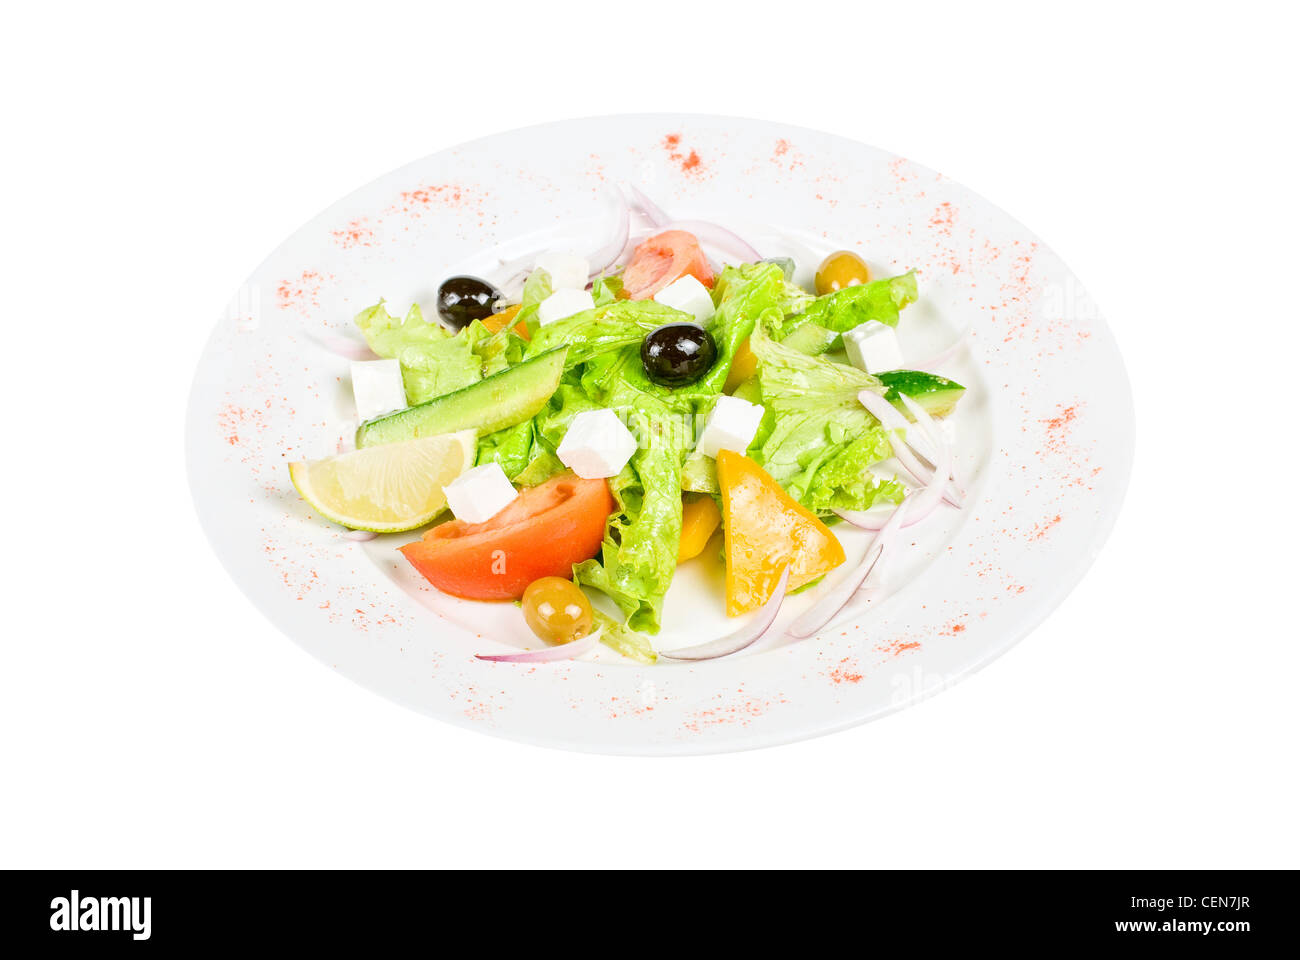 Greece salad dish isolated on a white background Stock Photo